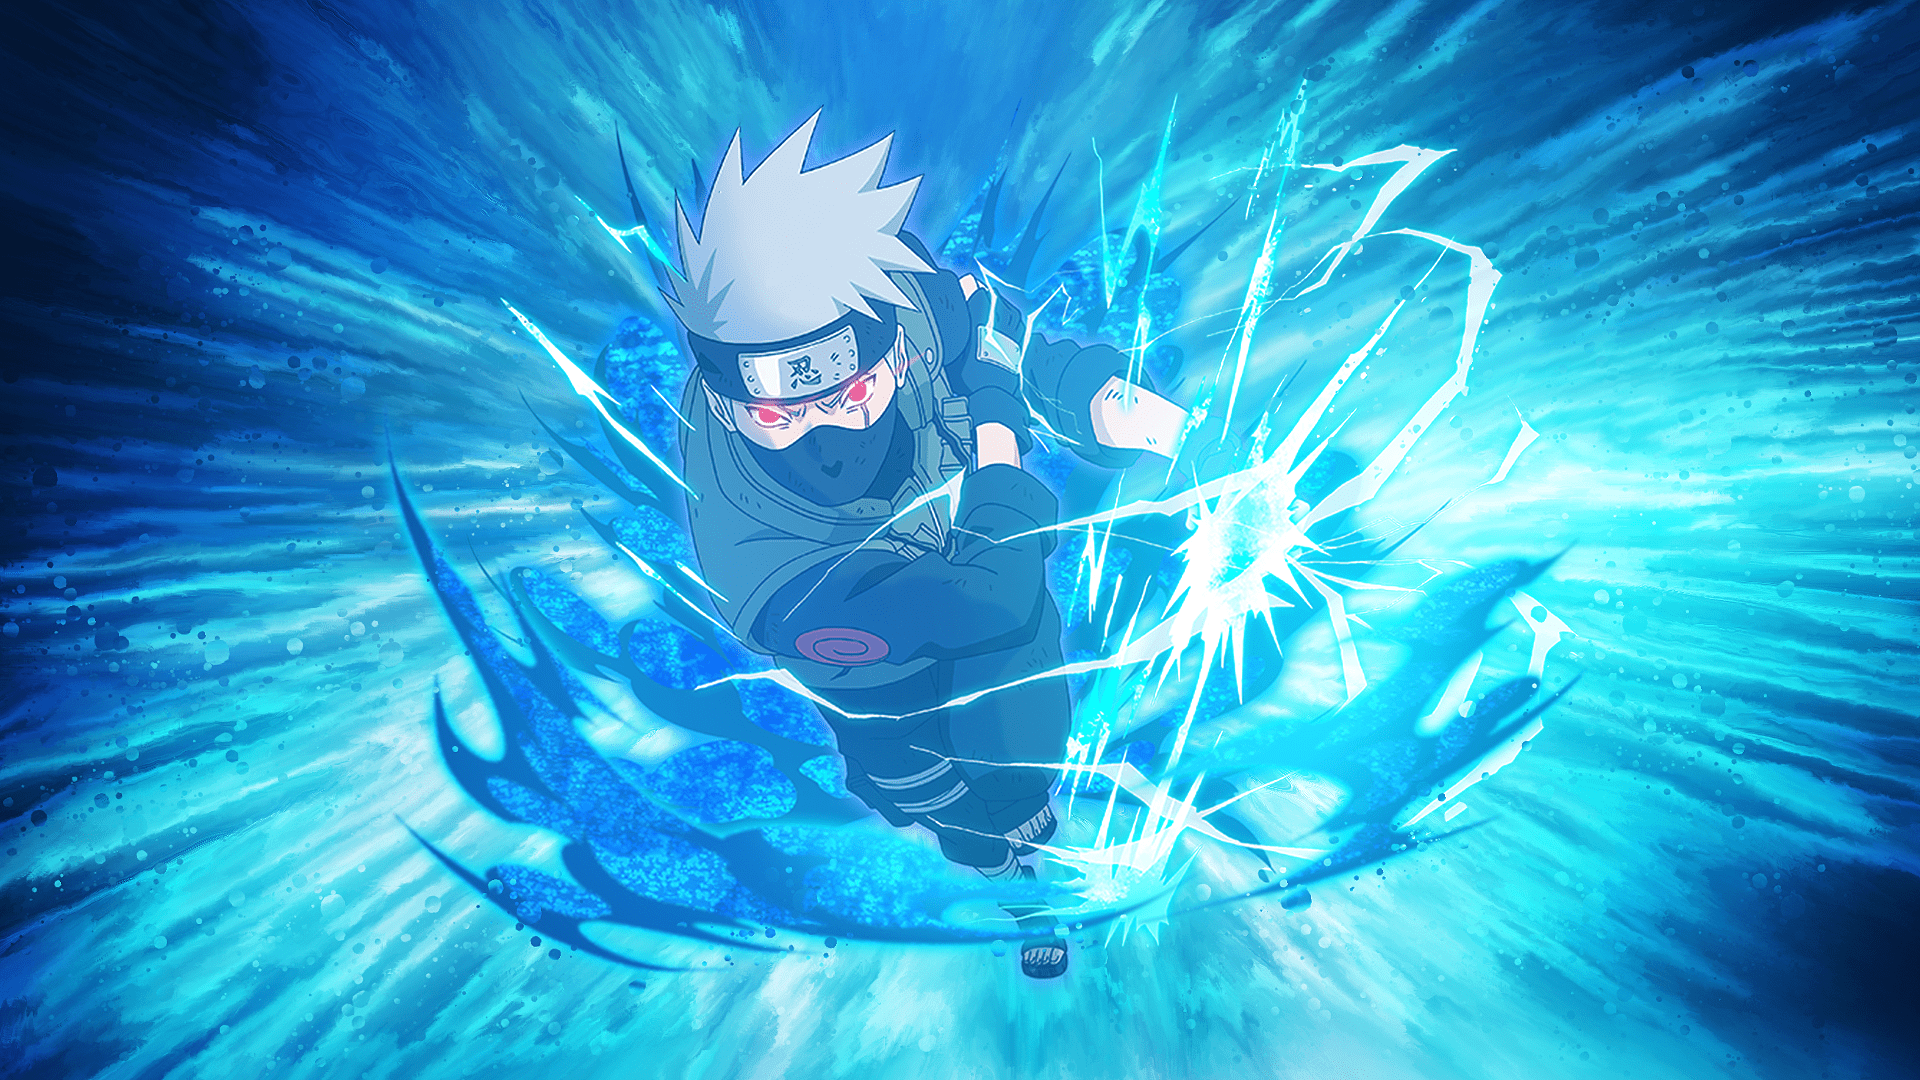 Wallpaper male, Naruto, Naruto, Kakashi Hatake, without a mask for mobile  and desktop, section сёнэн, resolution 1920x1080 - download